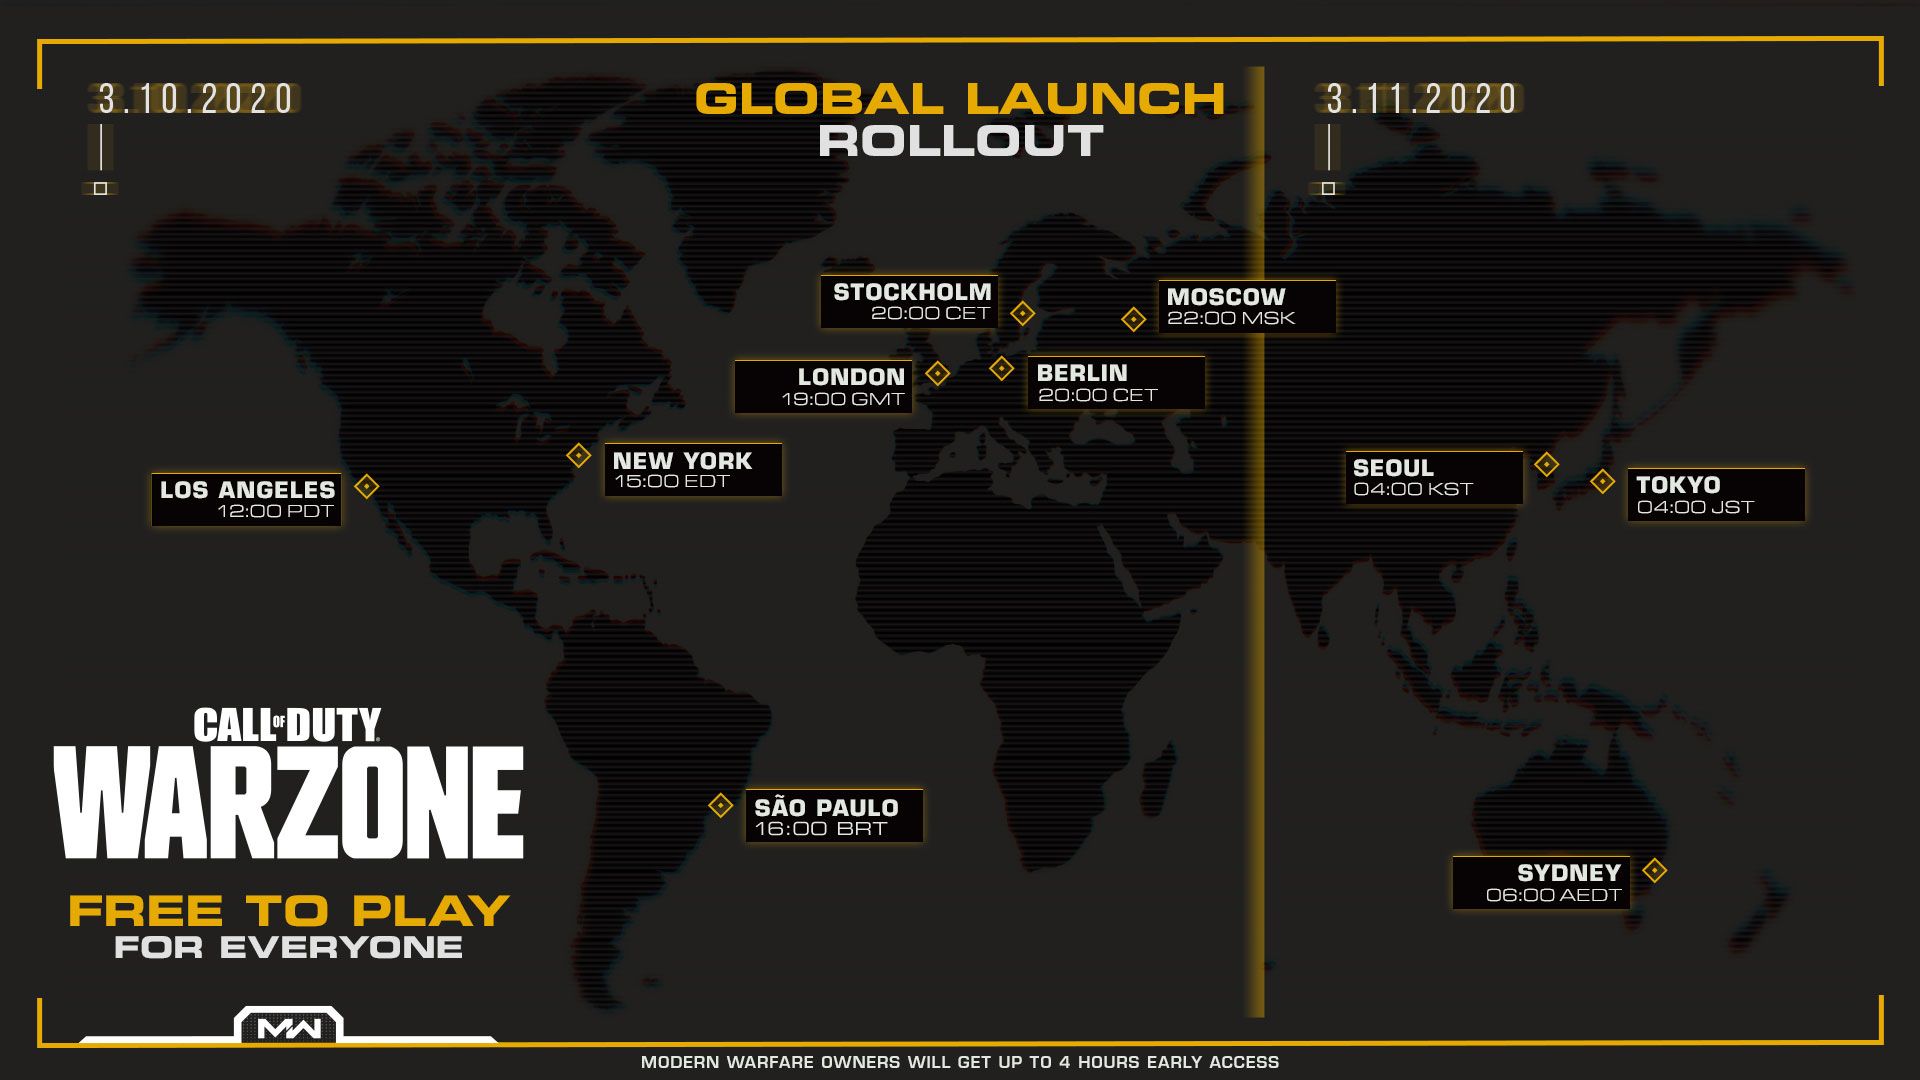 Call Of Duty Warzone, a new Battle Royale game launching soon is